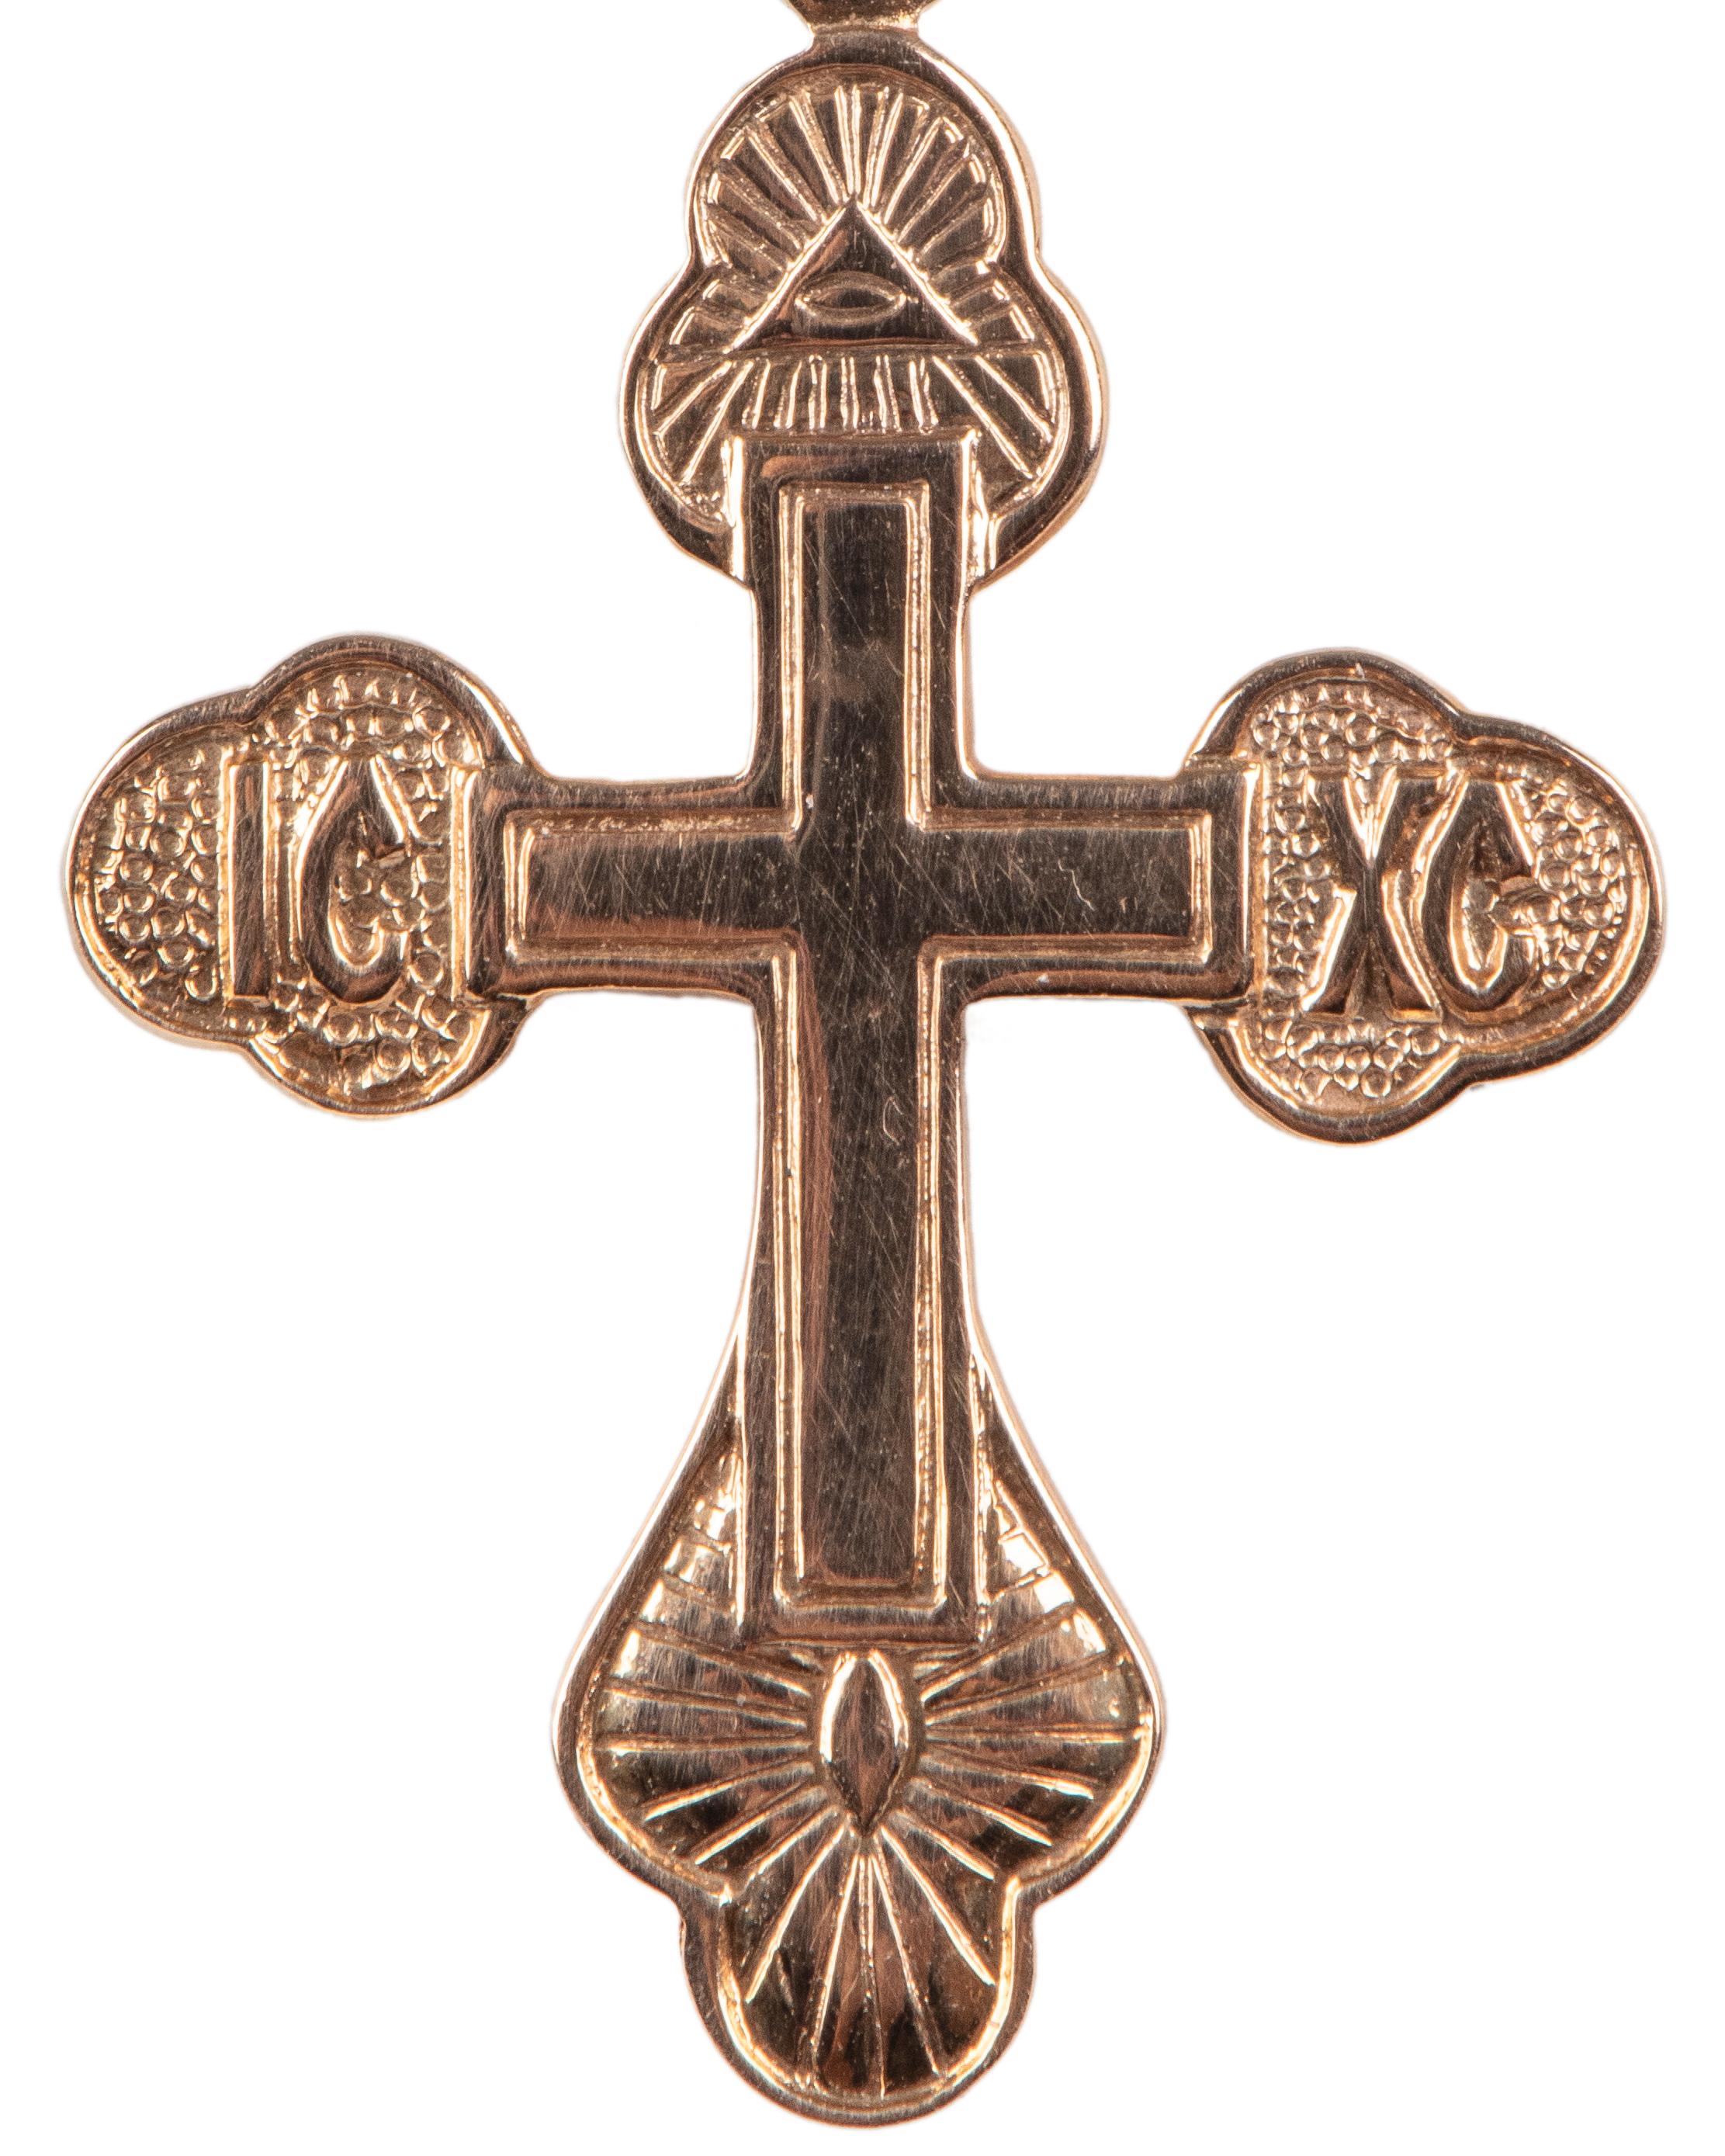 A Russian rose gold Greek style cross pendant, made in St. Petersburg, Russia.

St. Petersburg, 1990s, hallmarked.

1 3/8 in. (3.5 cm.) including suspension ring. Chain not included.
